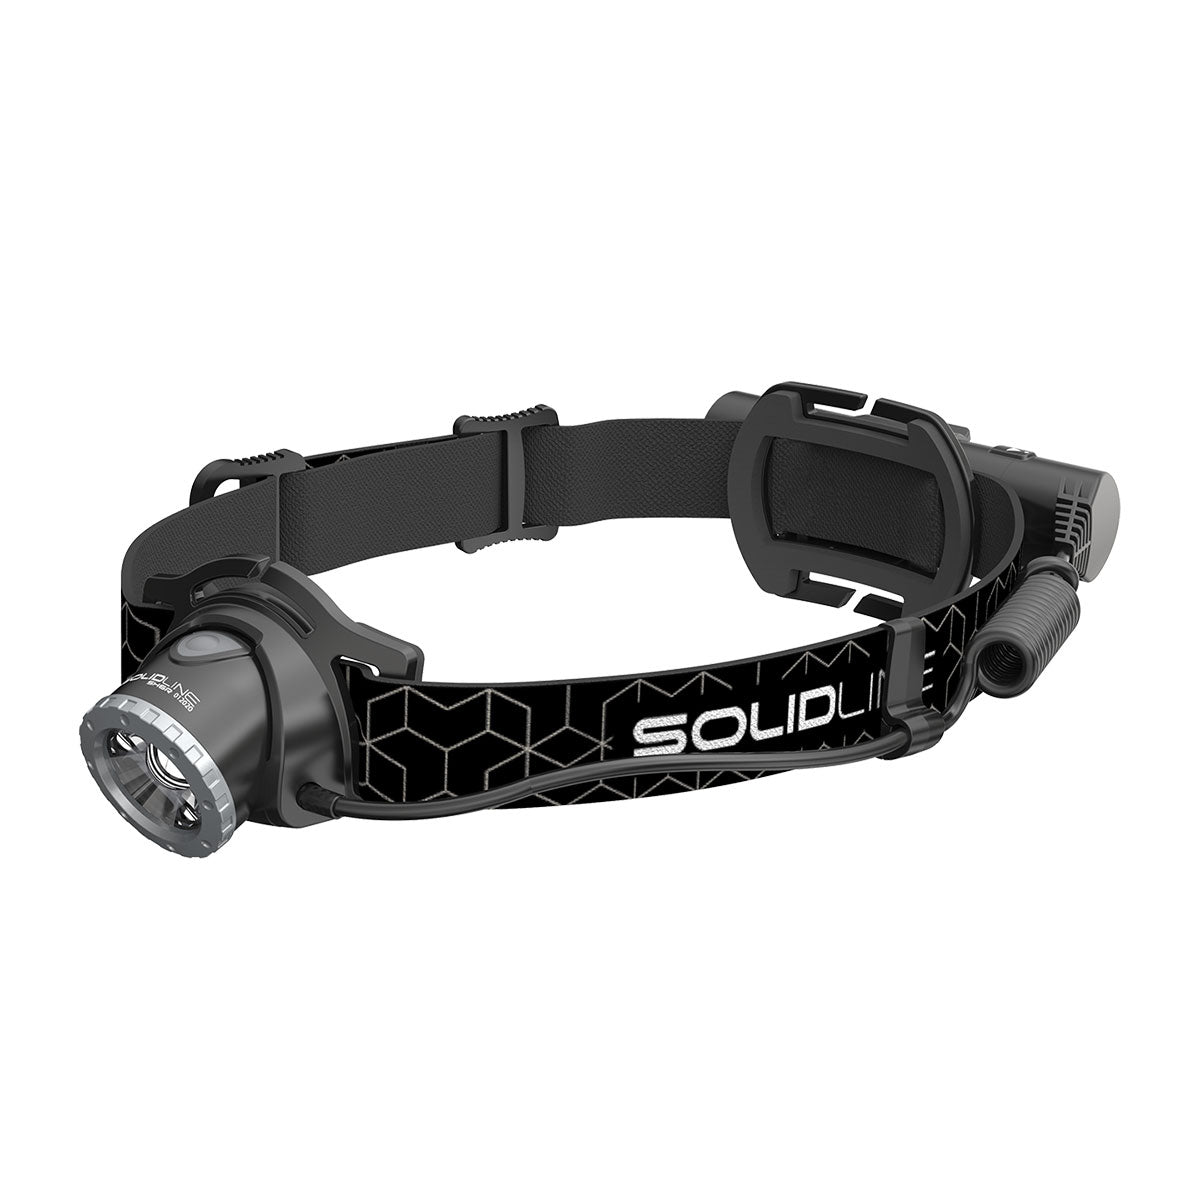 Ledlenser Solidline SH6R 600lm Rechargable Headlamp -  - Mansfield Hunting & Fishing - Products to prepare for Corona Virus